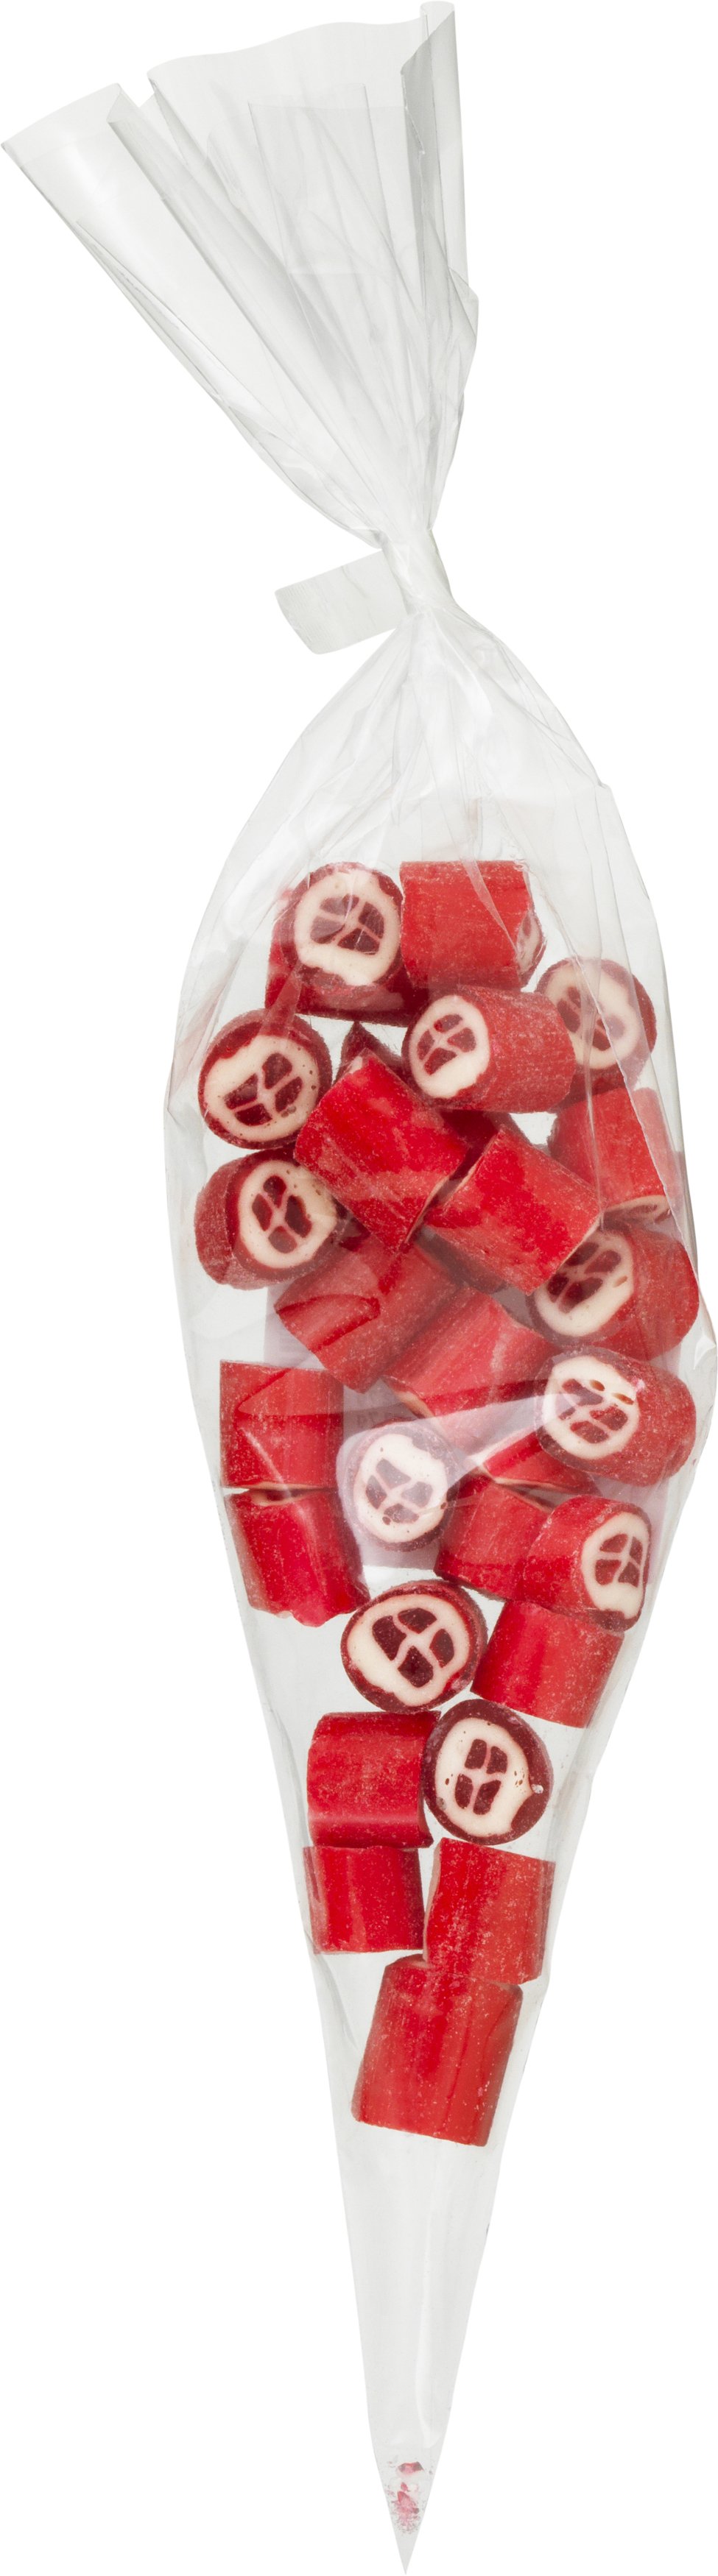 Møn candies with flags 90g